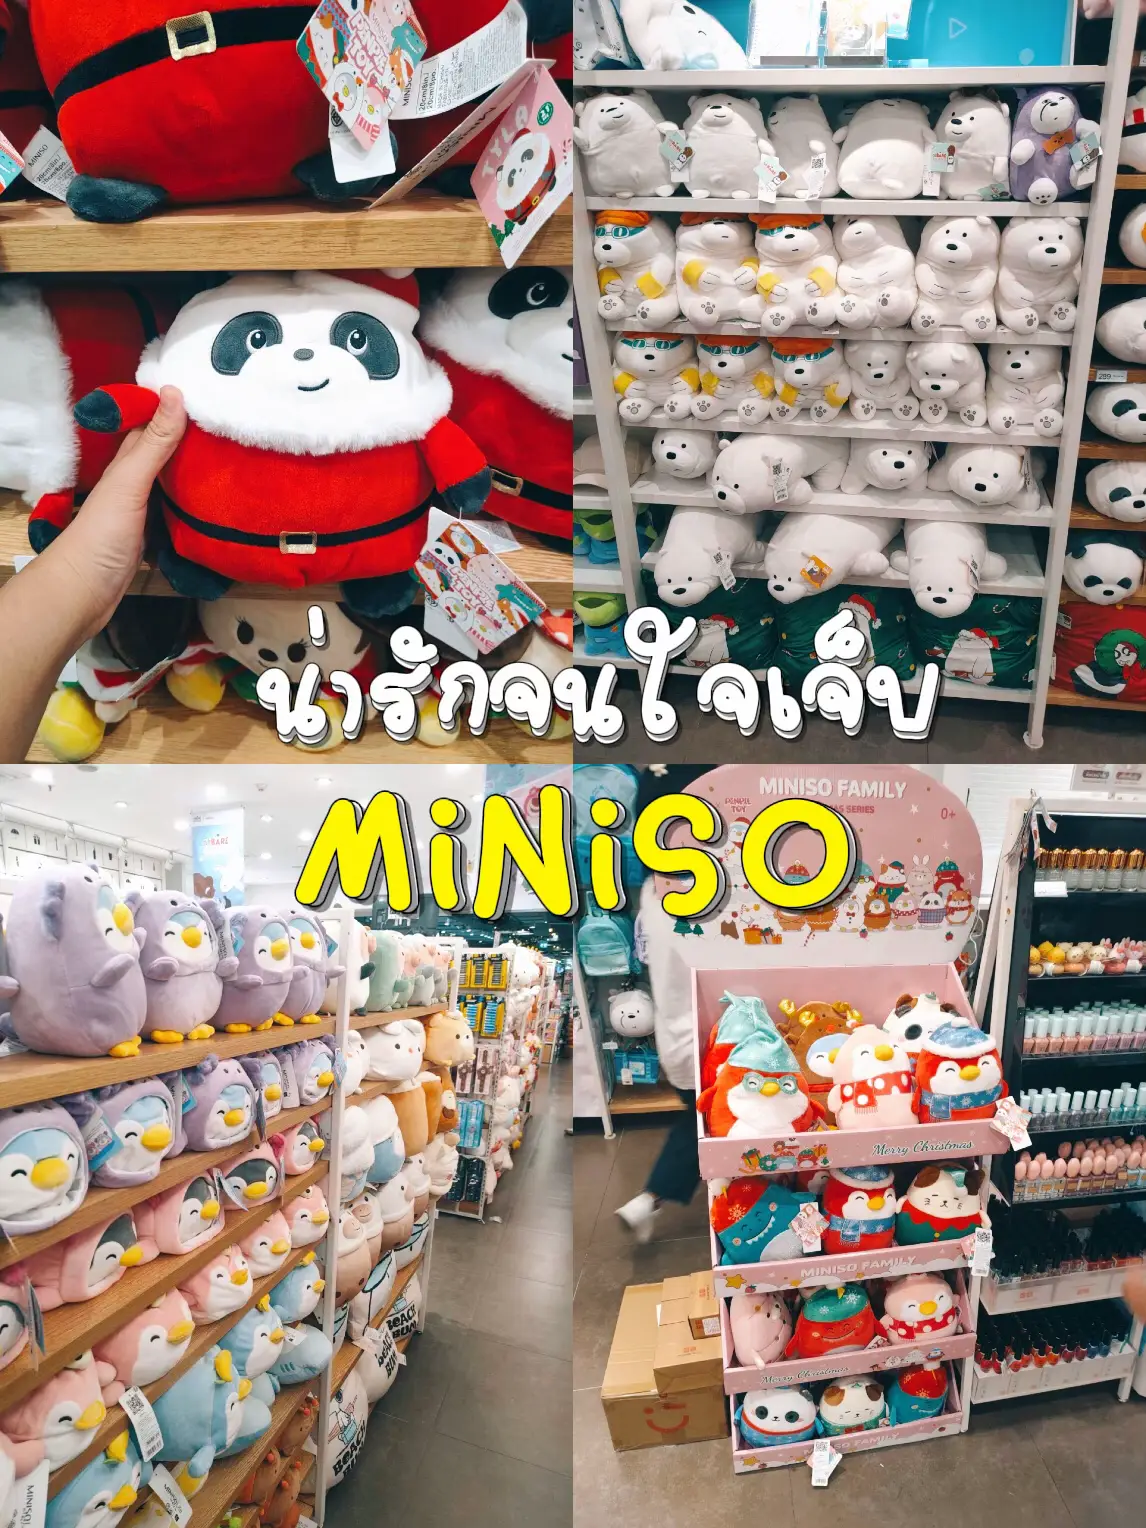 Went to my first Miniso / Sanrio store awhile ago and started